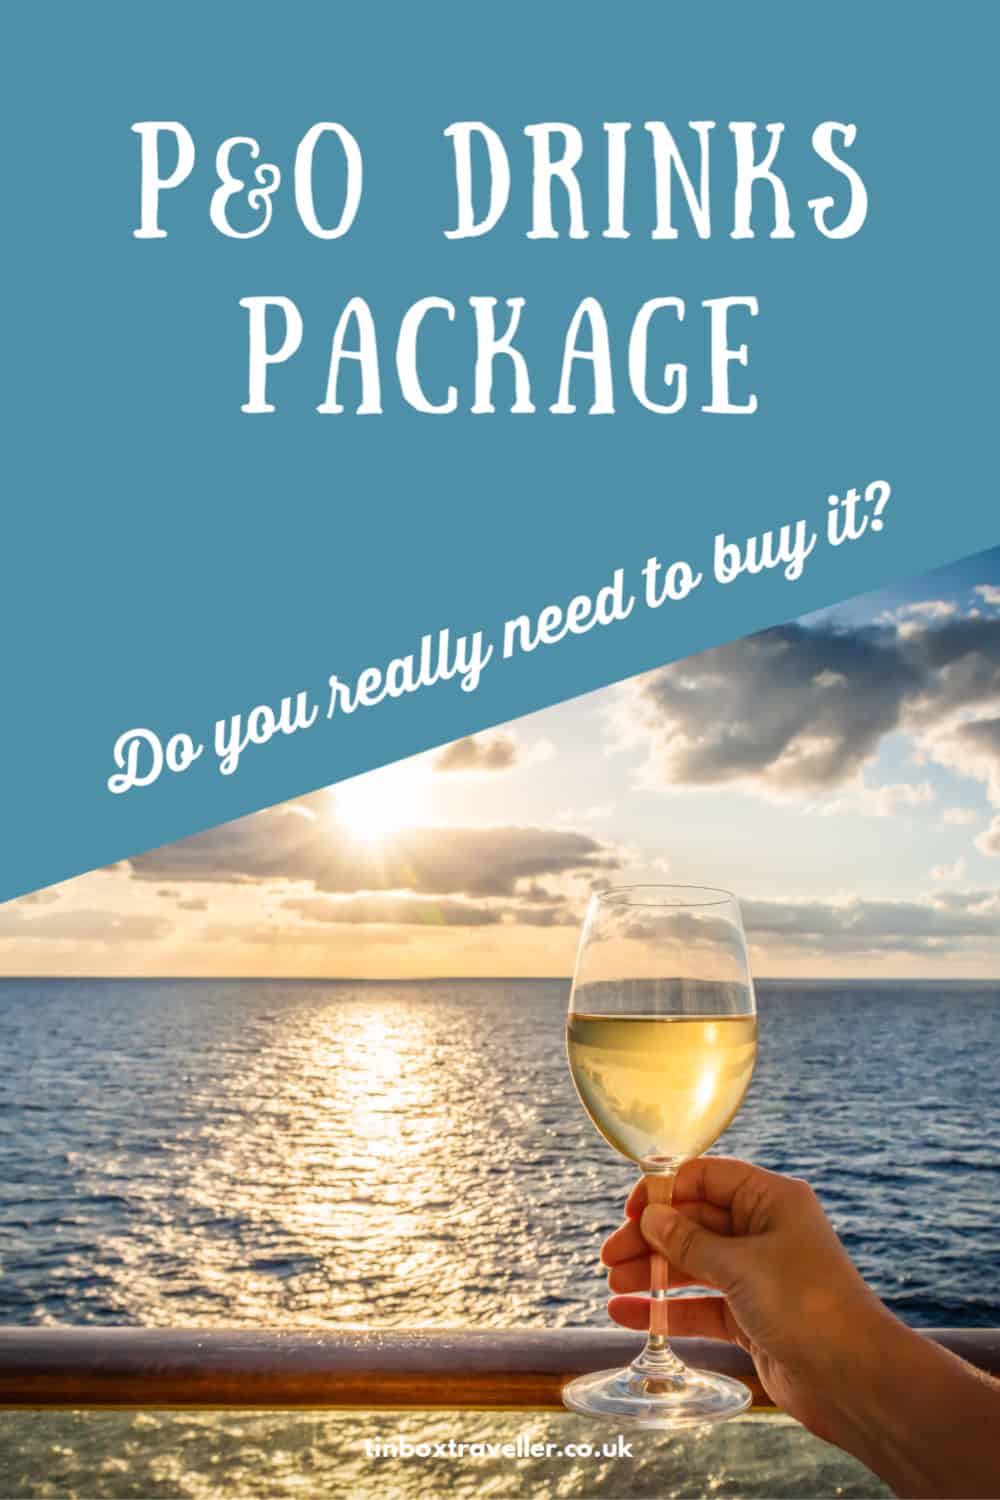 Is the P&O drinks package worth it? Tin Box Traveller